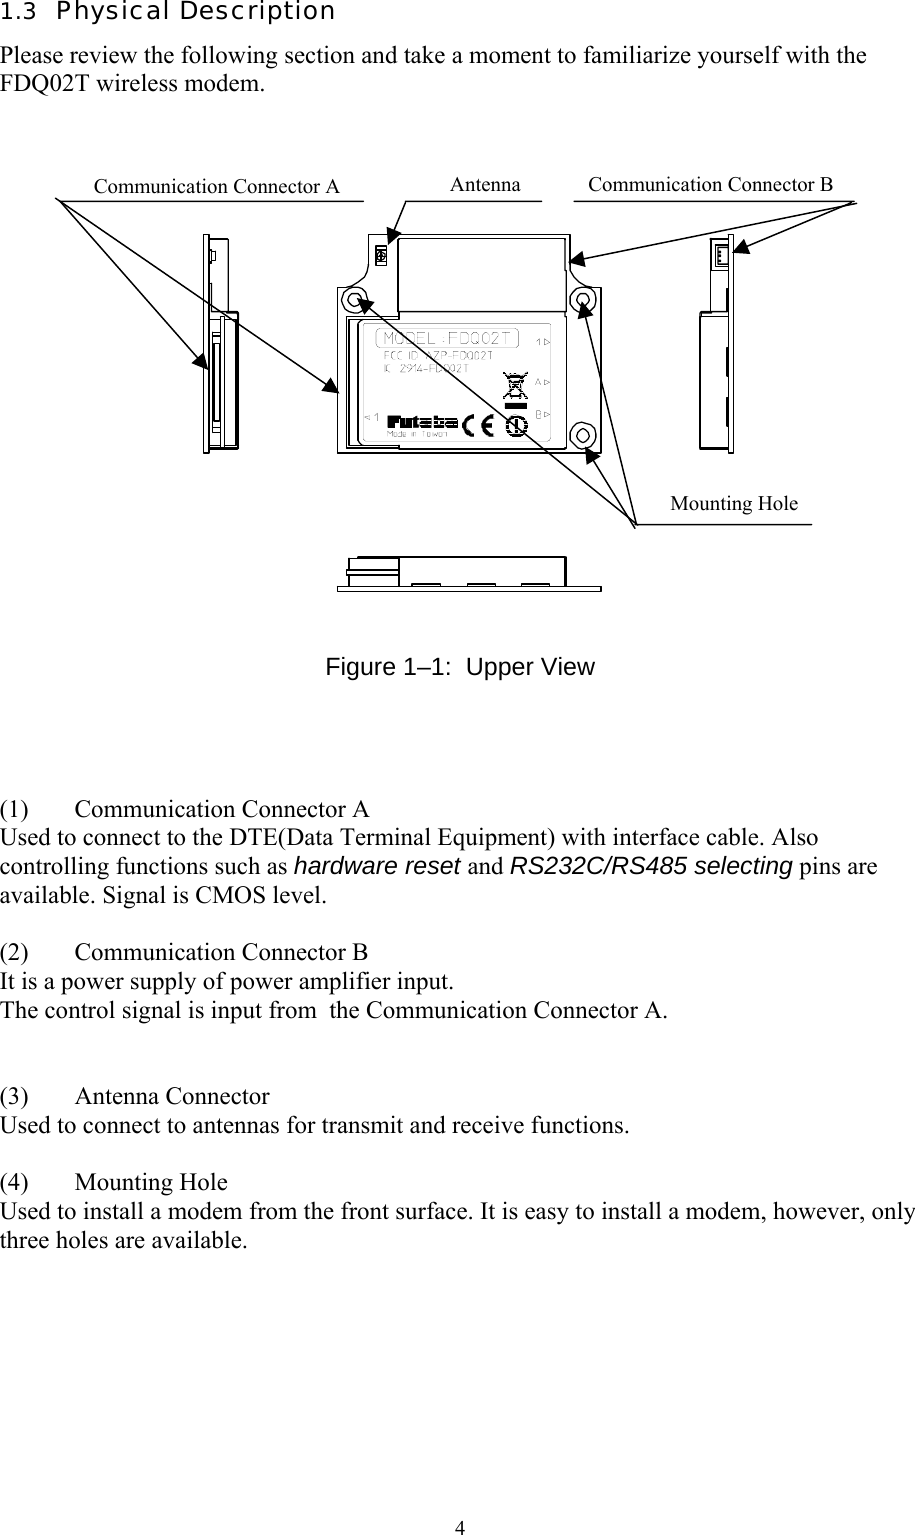  41.3  Physical Description Please review the following section and take a moment to familiarize yourself with the FDQ02T wireless modem.                   Figure 1–1:  Upper View     (1)  Communication Connector A Used to connect to the DTE(Data Terminal Equipment) with interface cable. Also controlling functions such as hardware reset and RS232C/RS485 selecting pins are available. Signal is CMOS level.   (2)  Communication Connector B It is a power supply of power amplifier input. The control signal is input from  the Communication Connector A.   (3) Antenna Connector Used to connect to antennas for transmit and receive functions.  (4) Mounting Hole Used to install a modem from the front surface. It is easy to install a modem, however, only three holes are available.  Communication Connector A  Communication Connector B AntennaMounting Hole 